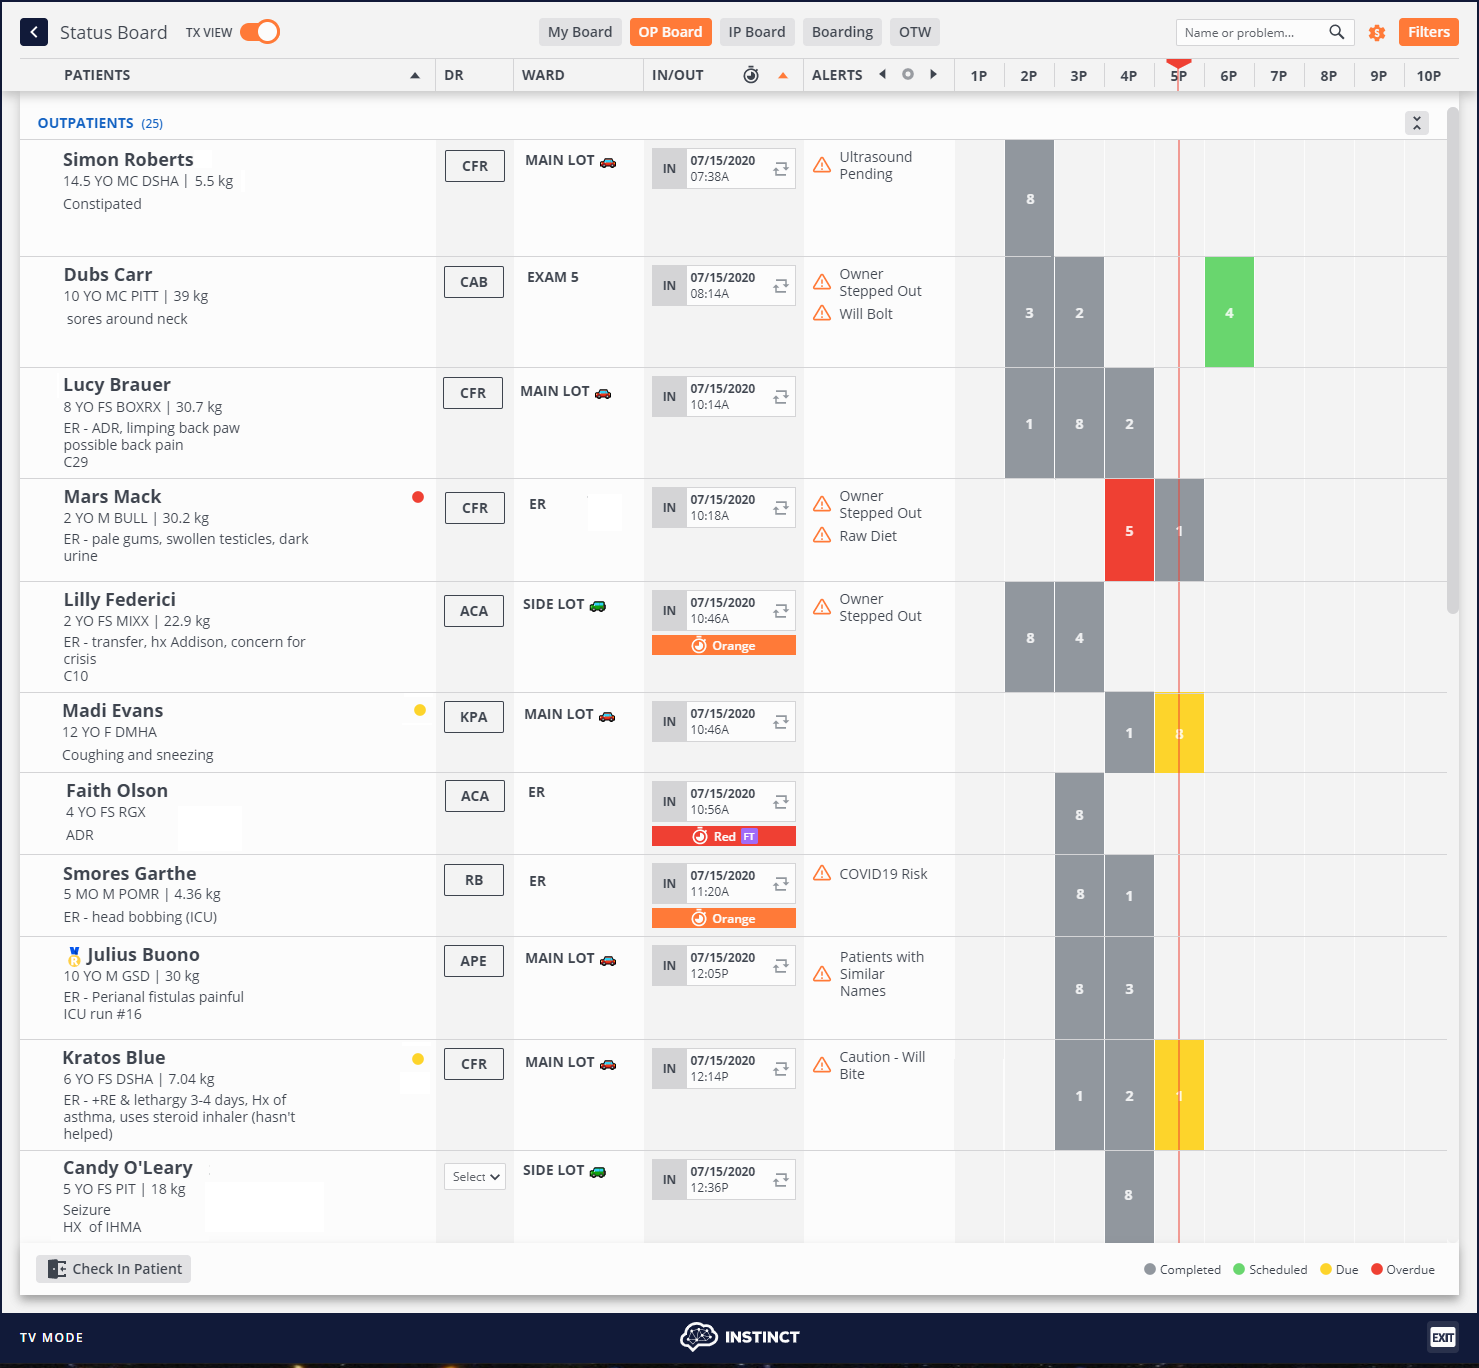 Screenshot of Instinct software, showing the status board, which lists outpatients, wards, alerts, and more